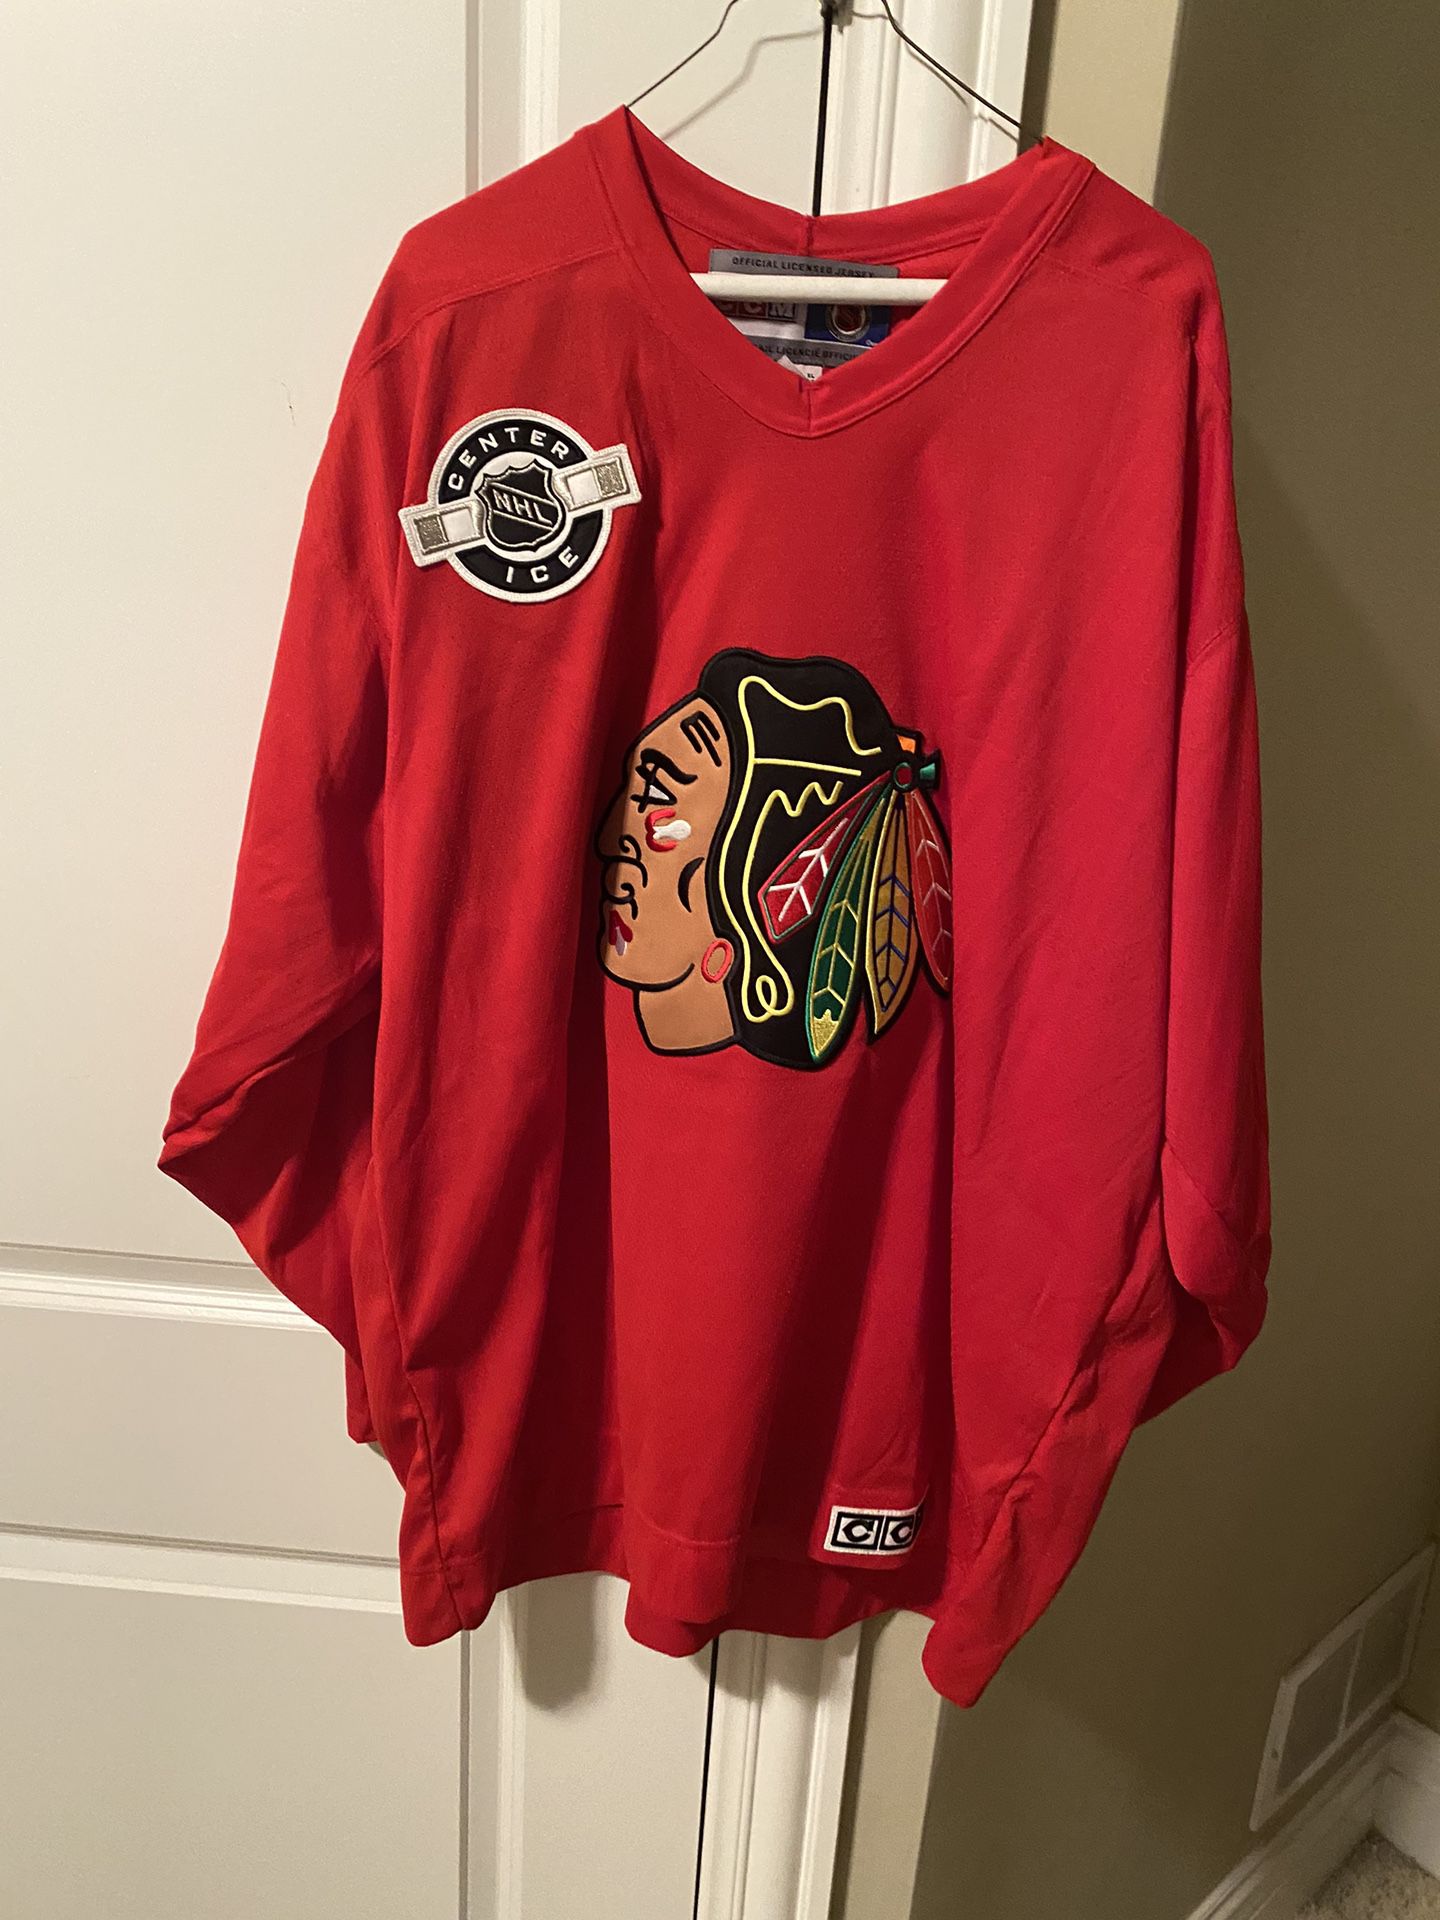 NHL Jerseys for sale in Chicago, Illinois